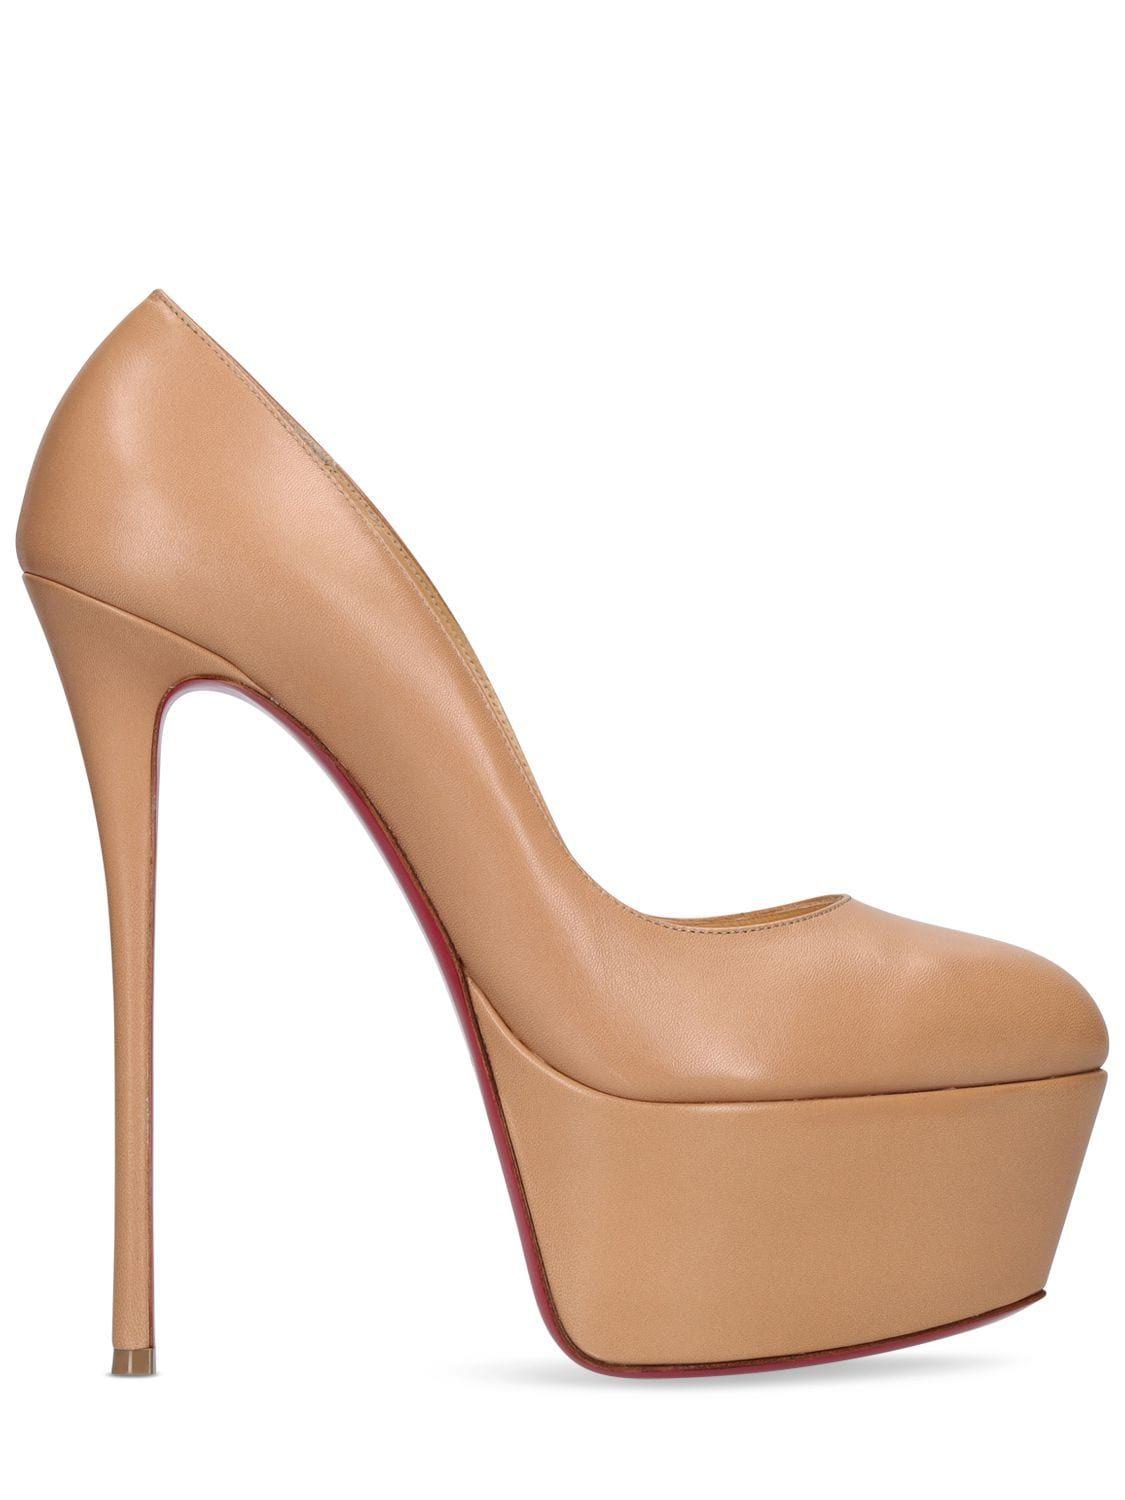 Christian Louboutin Dolly Alta 160 Leather Red Sole Platform Pumps Eur  39/US 9